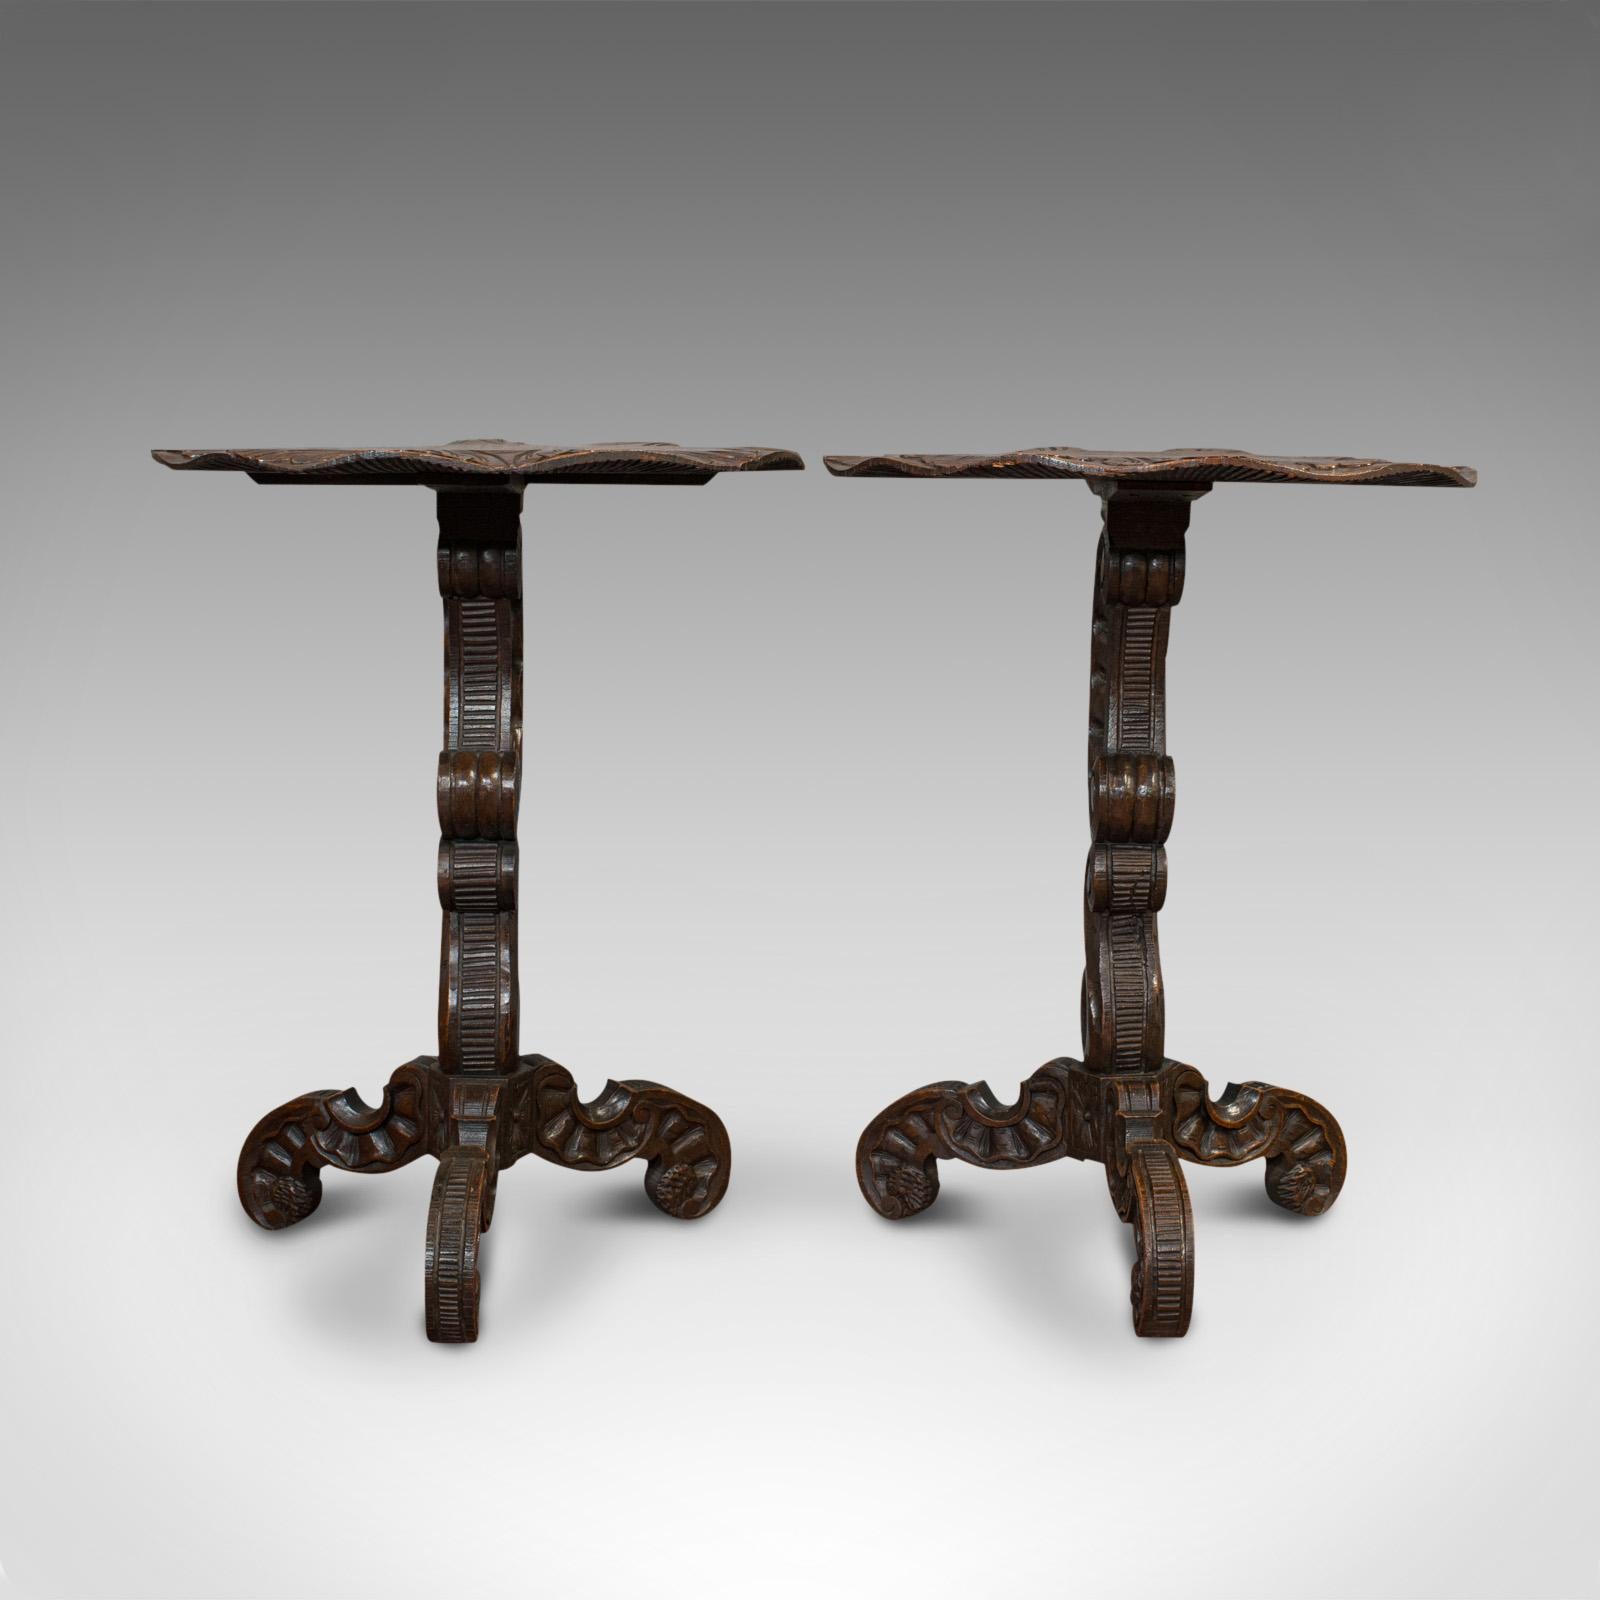 This is a pair of antique side tables. An Asian, Chinese elm carved occasional table or wine stand, dating to the late Victorian period, circa 1900.

Superb carved tables with Oriental appeal
Displaying a desirable aged patina
Chinese elm shows